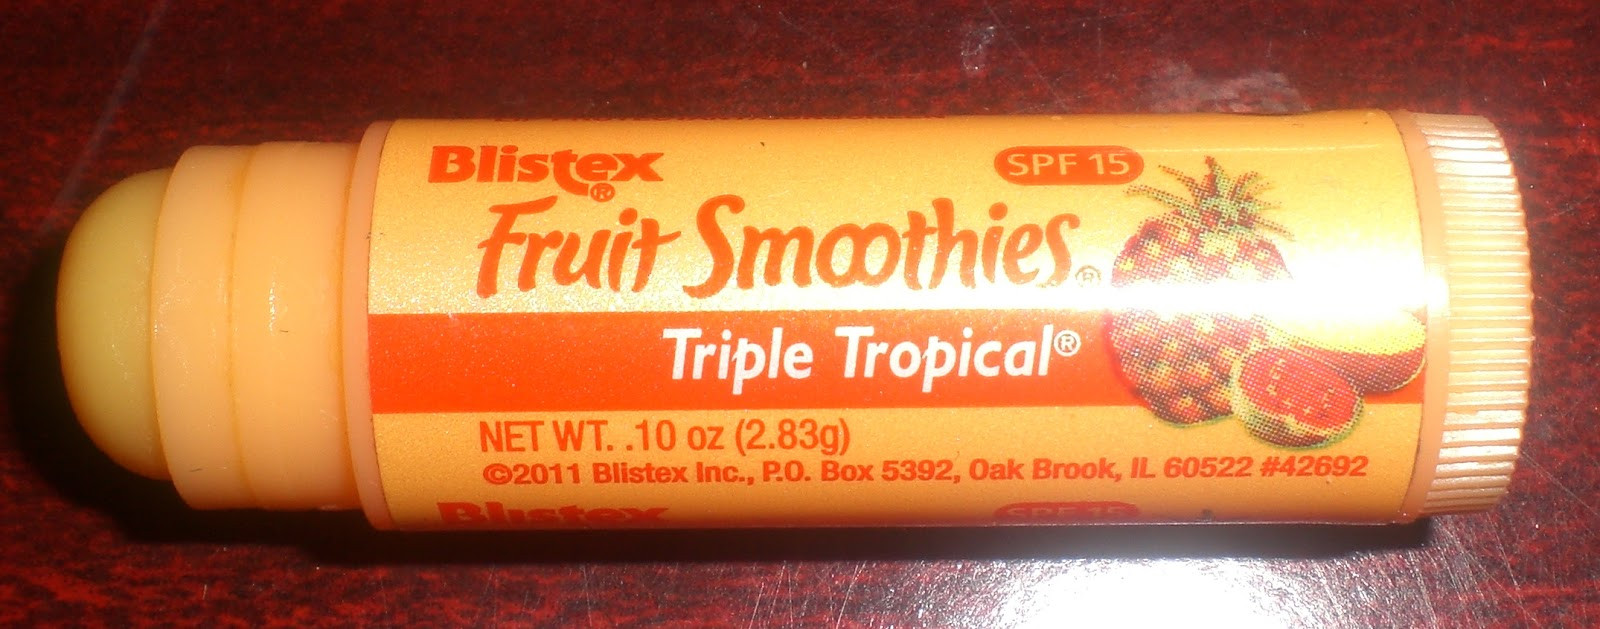 Blistex Fruit Smoothies
 Cotton Candy Fro Blistex Fruit Smoothies Lip Balm